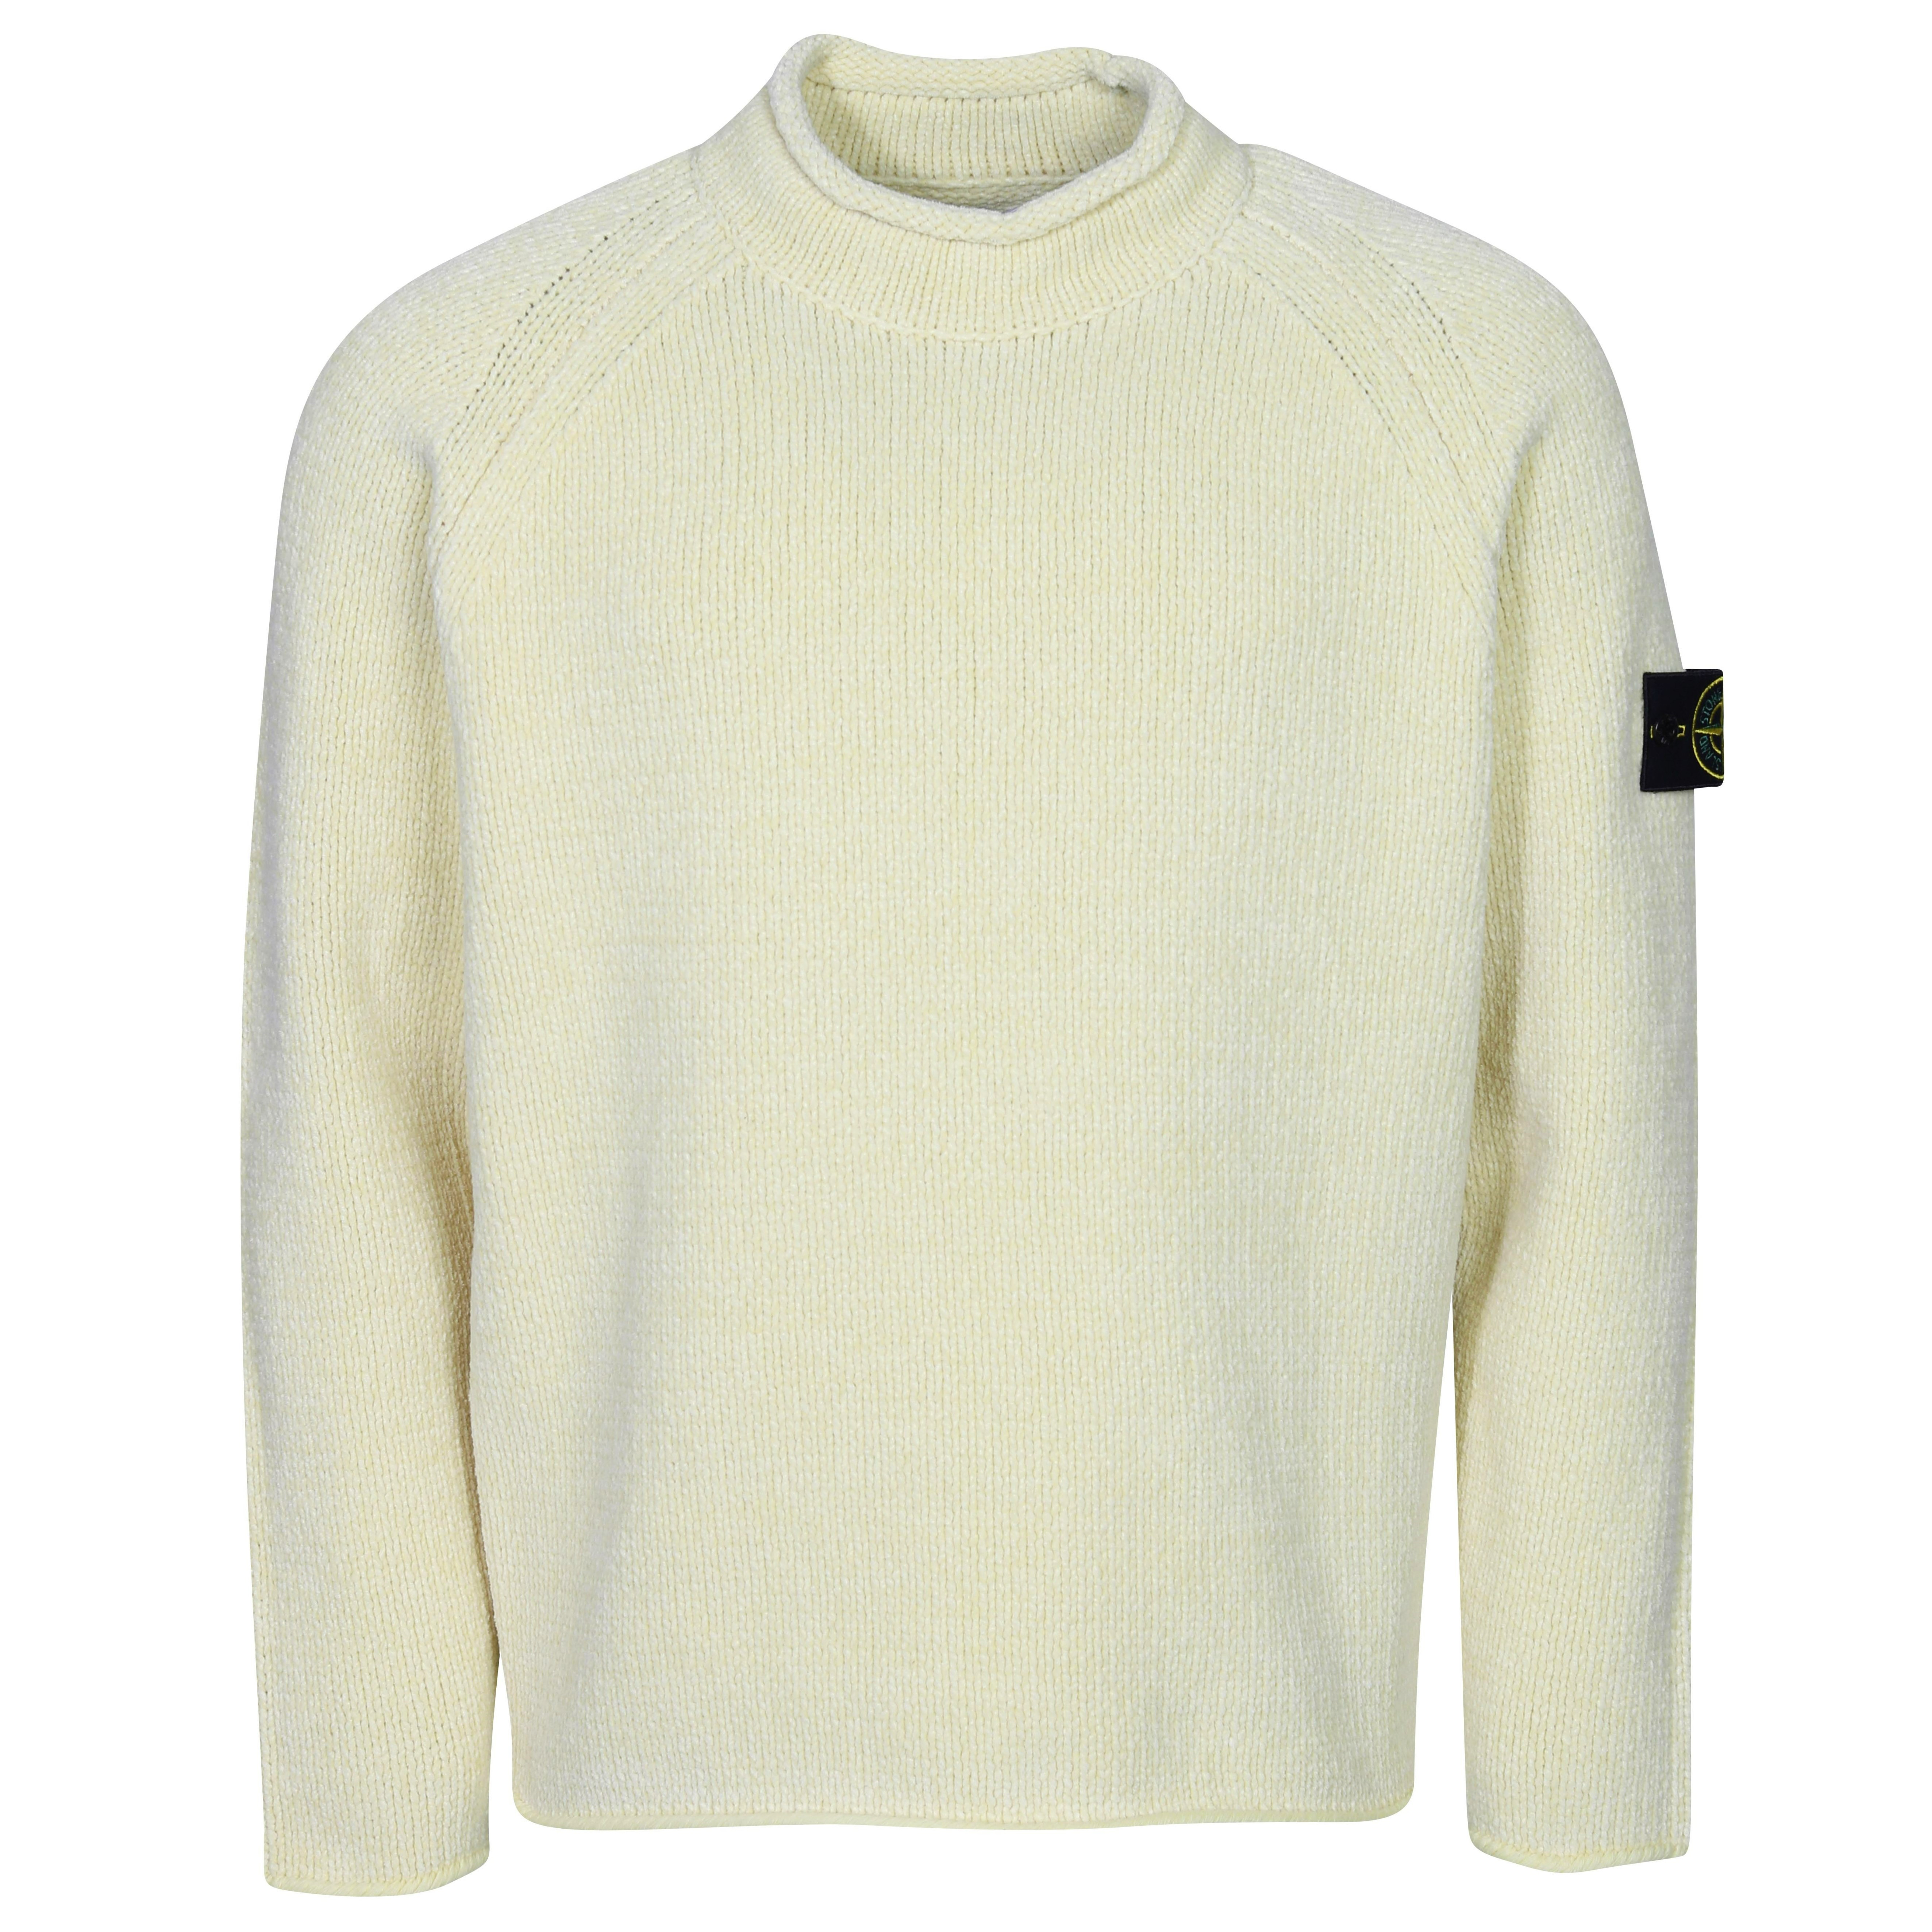 Stone Island Knit Pullover in Light Yellow